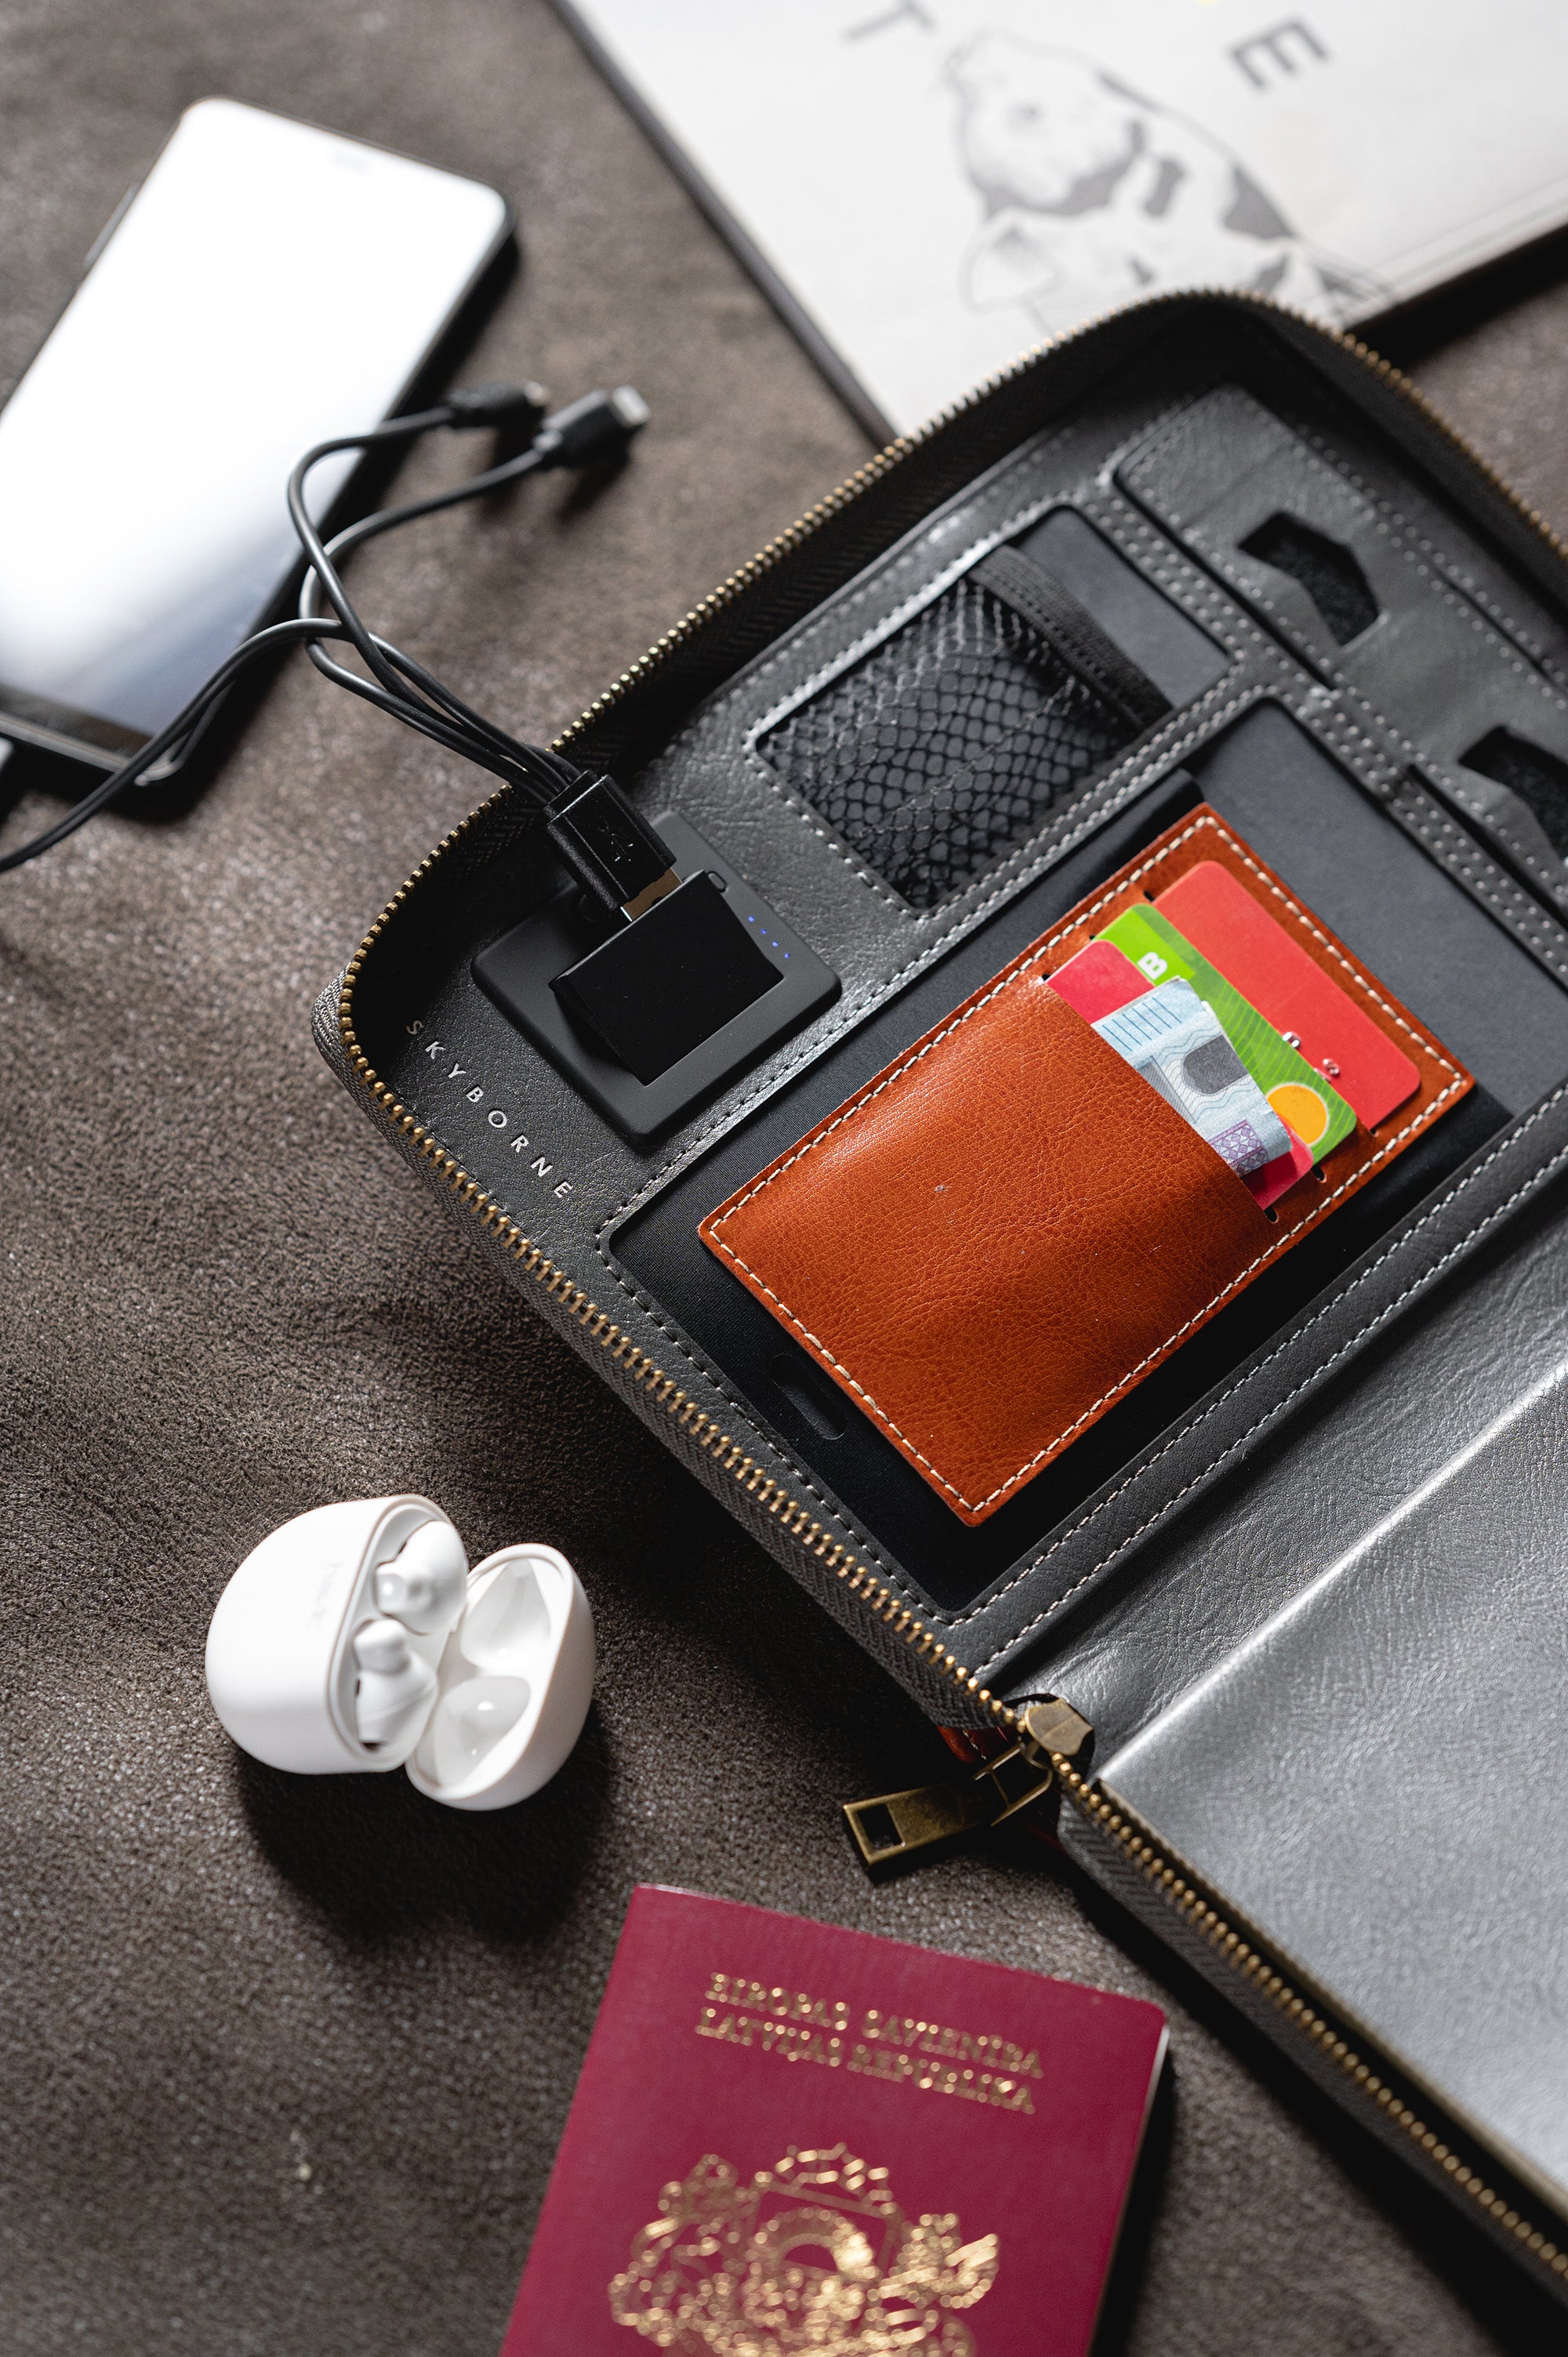 iTravel Folio 4.0: An innovative travel organizer with built-in